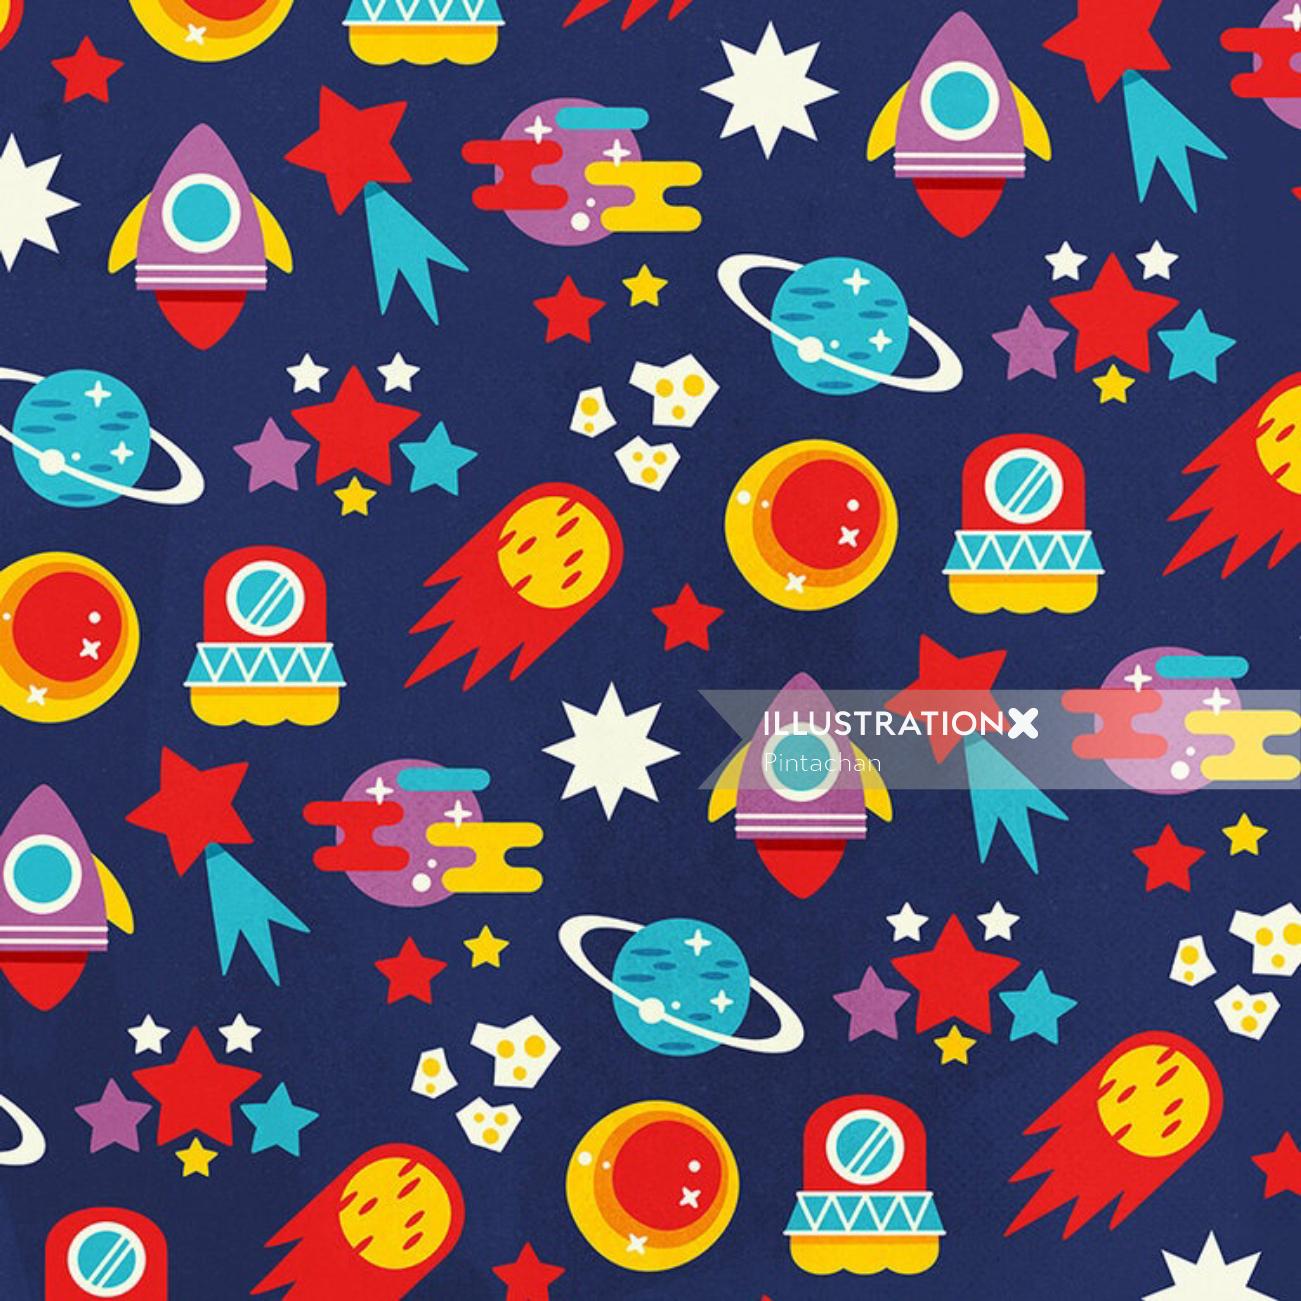 Cartoon design of Space with Planets